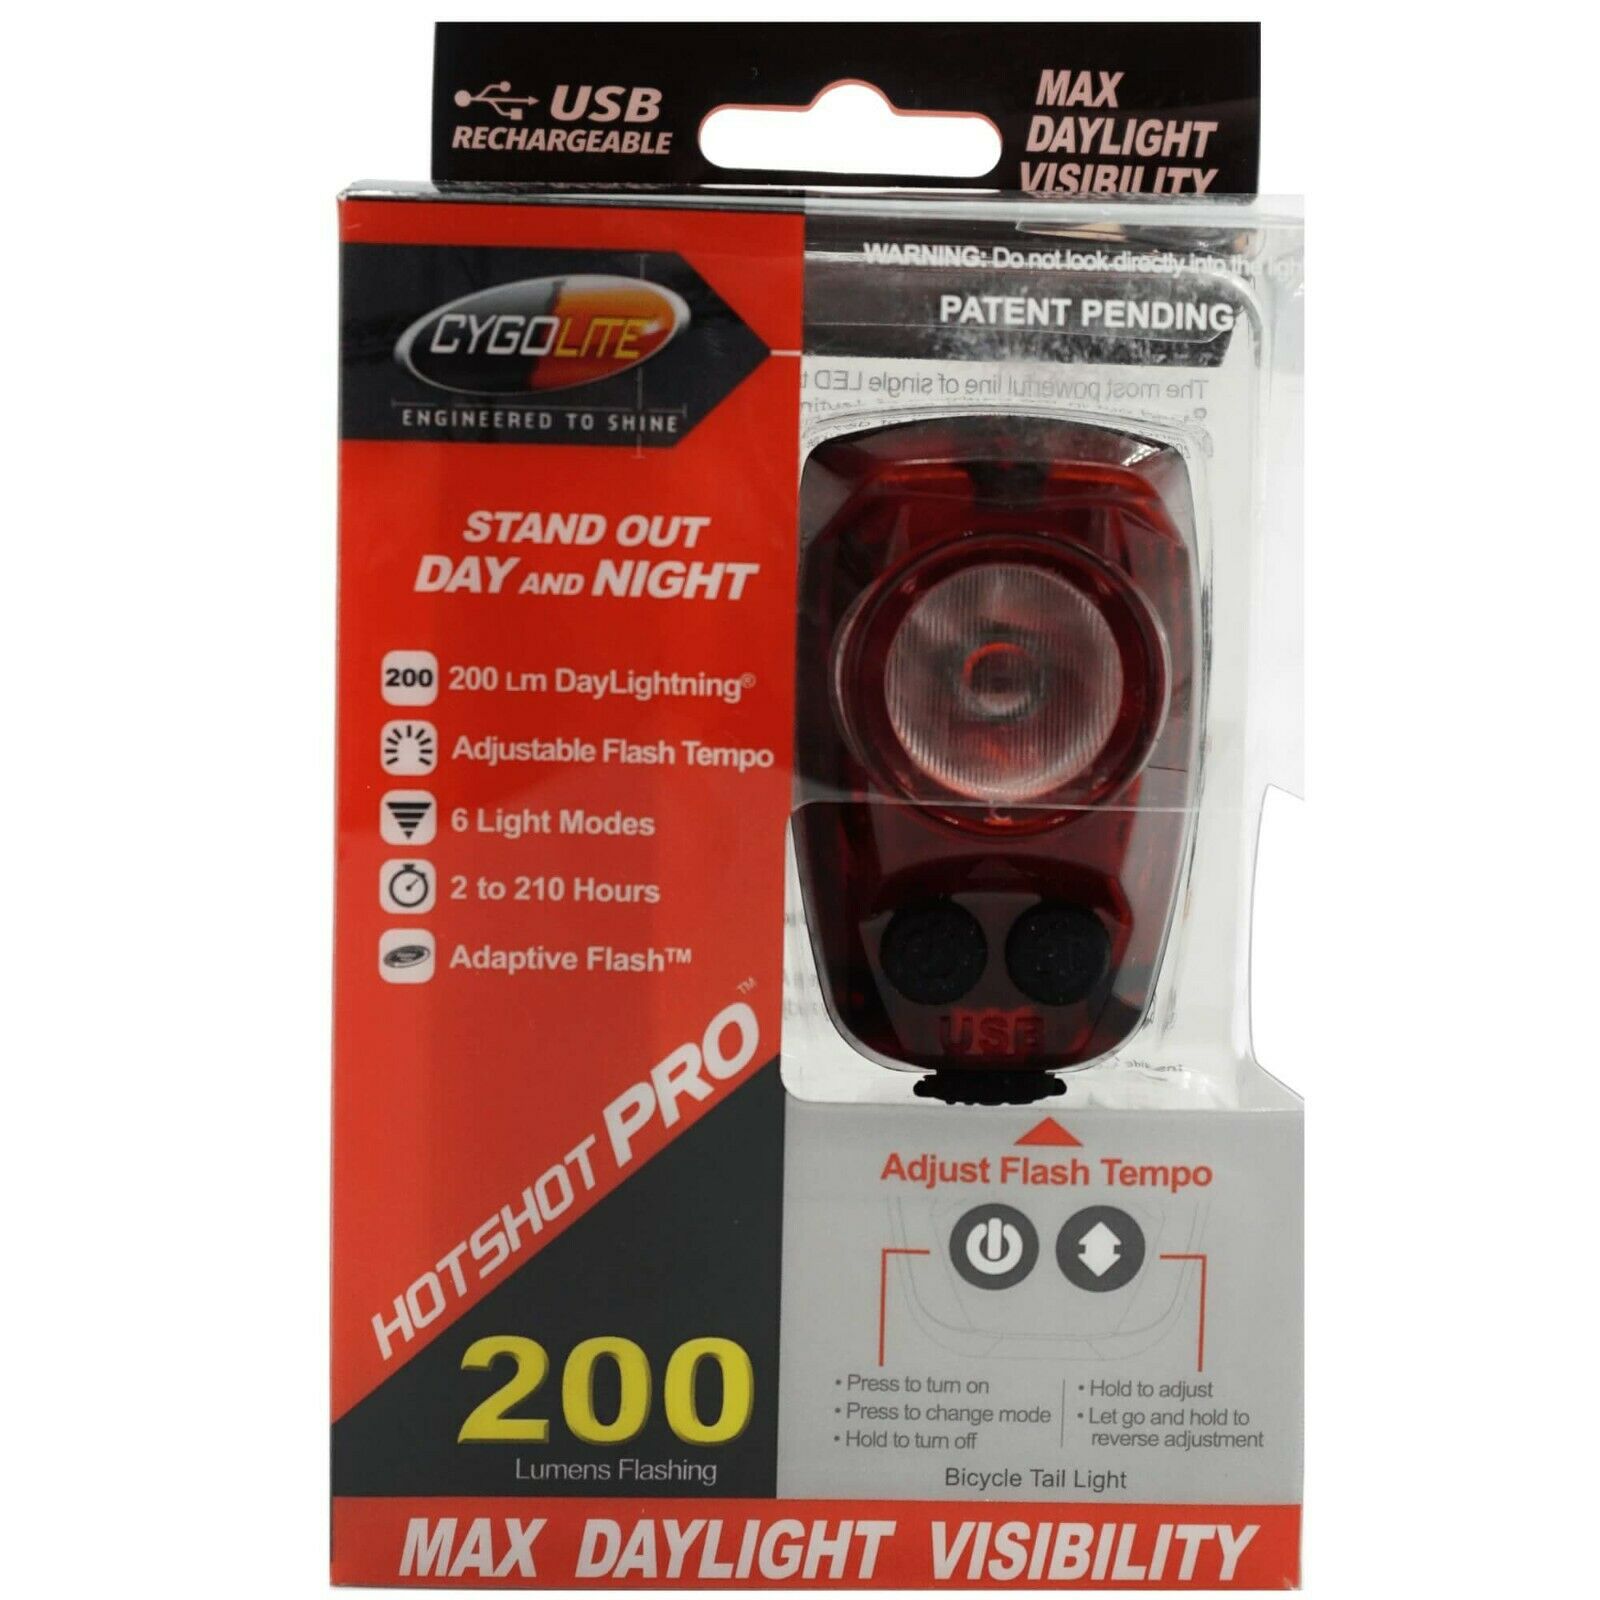 Cygolite Hotshot Pro 200 USB Rechargeable Tail Light with Hard Post Mount - The Bikesmiths